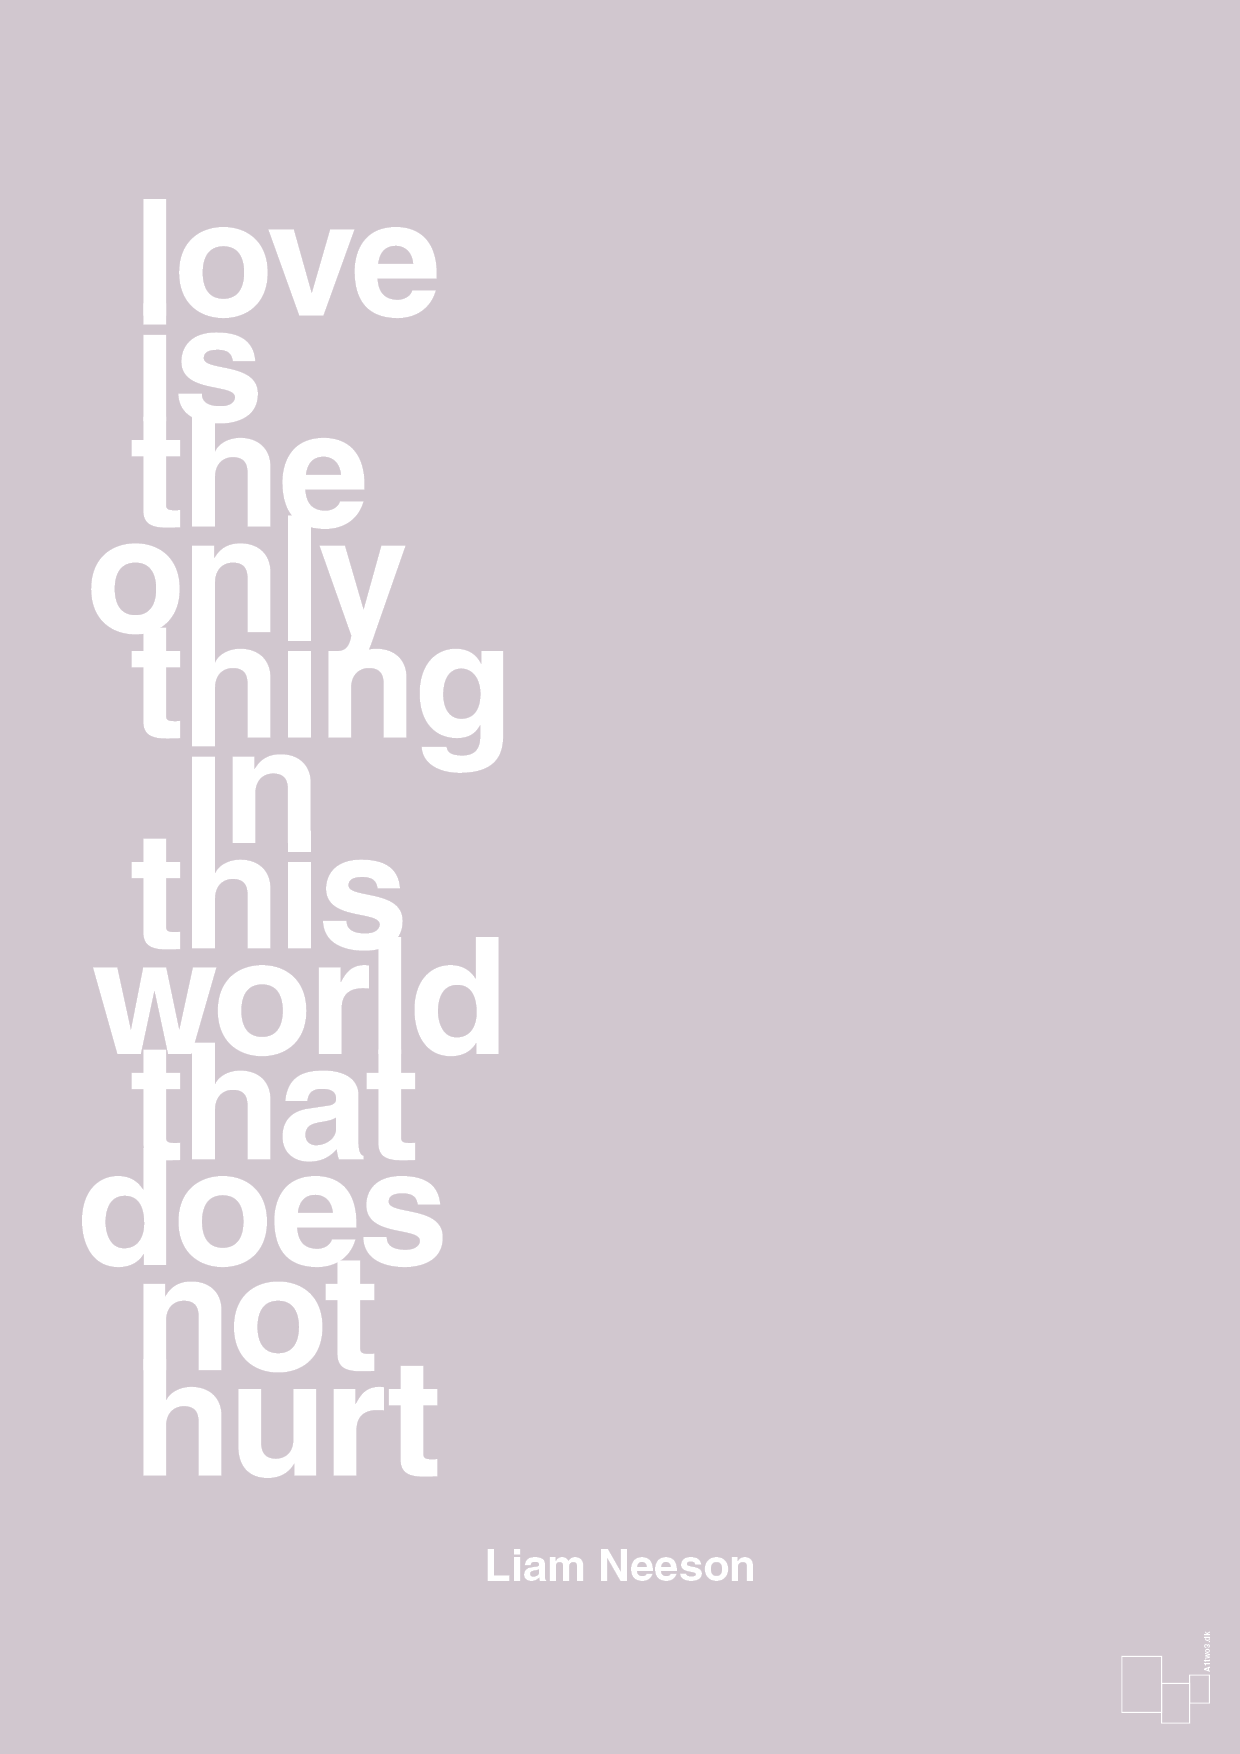 love is the only thing in this world that does not hurt - Plakat med Citater i Dusty Lilac